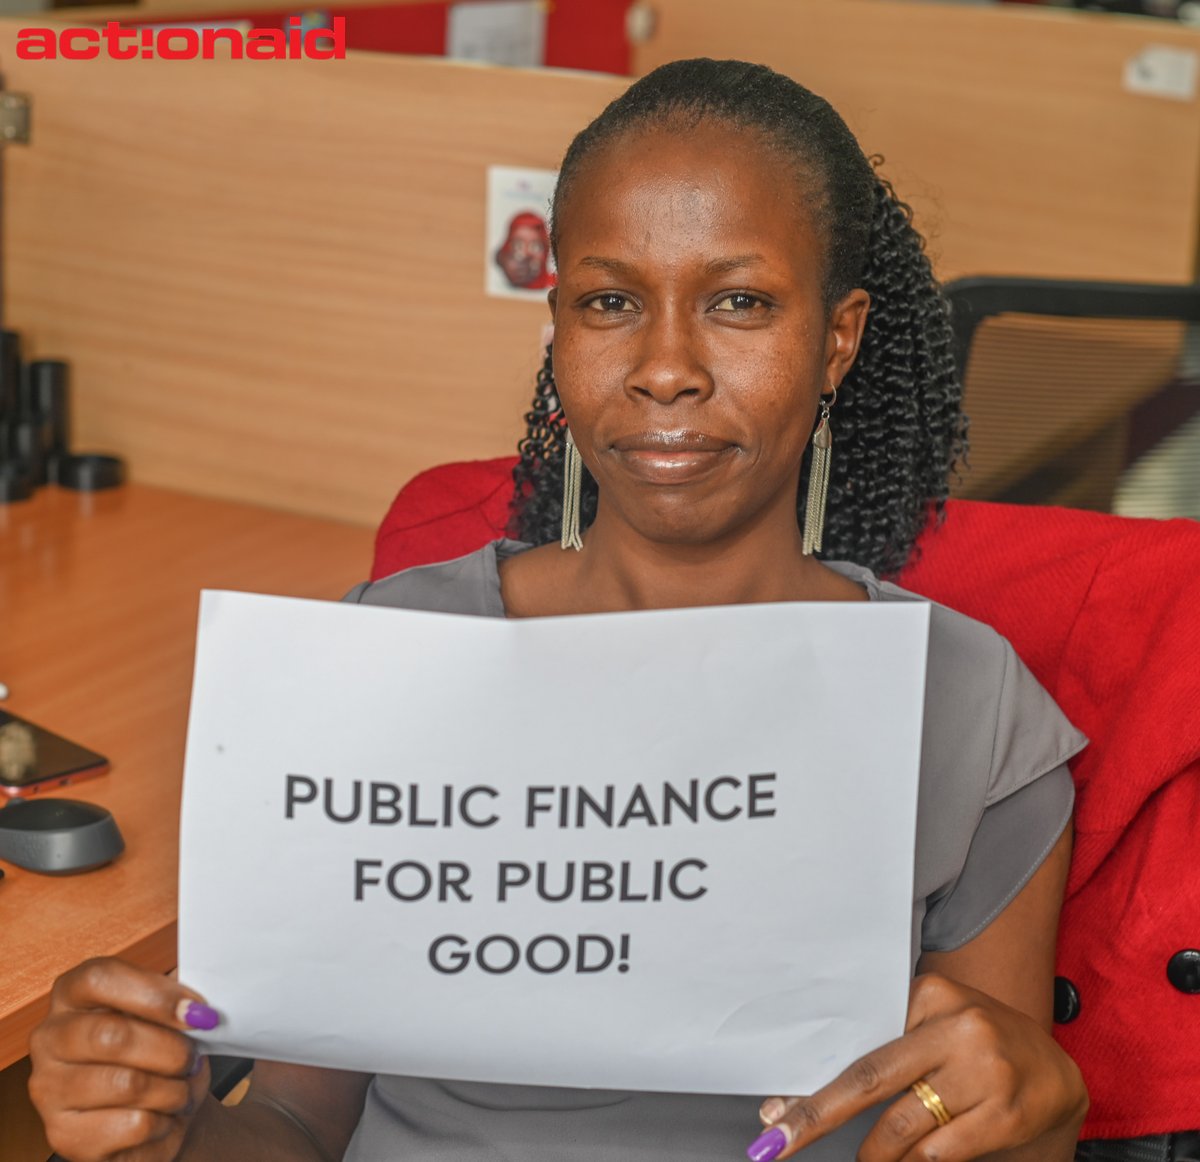 The time to act on climate change is now, and public finance can be a powerful catalyst for meaningful change. Let's harness the potential of our financial systems to safeguard our planet and secure a sustainable future for all. #FixTheFinance